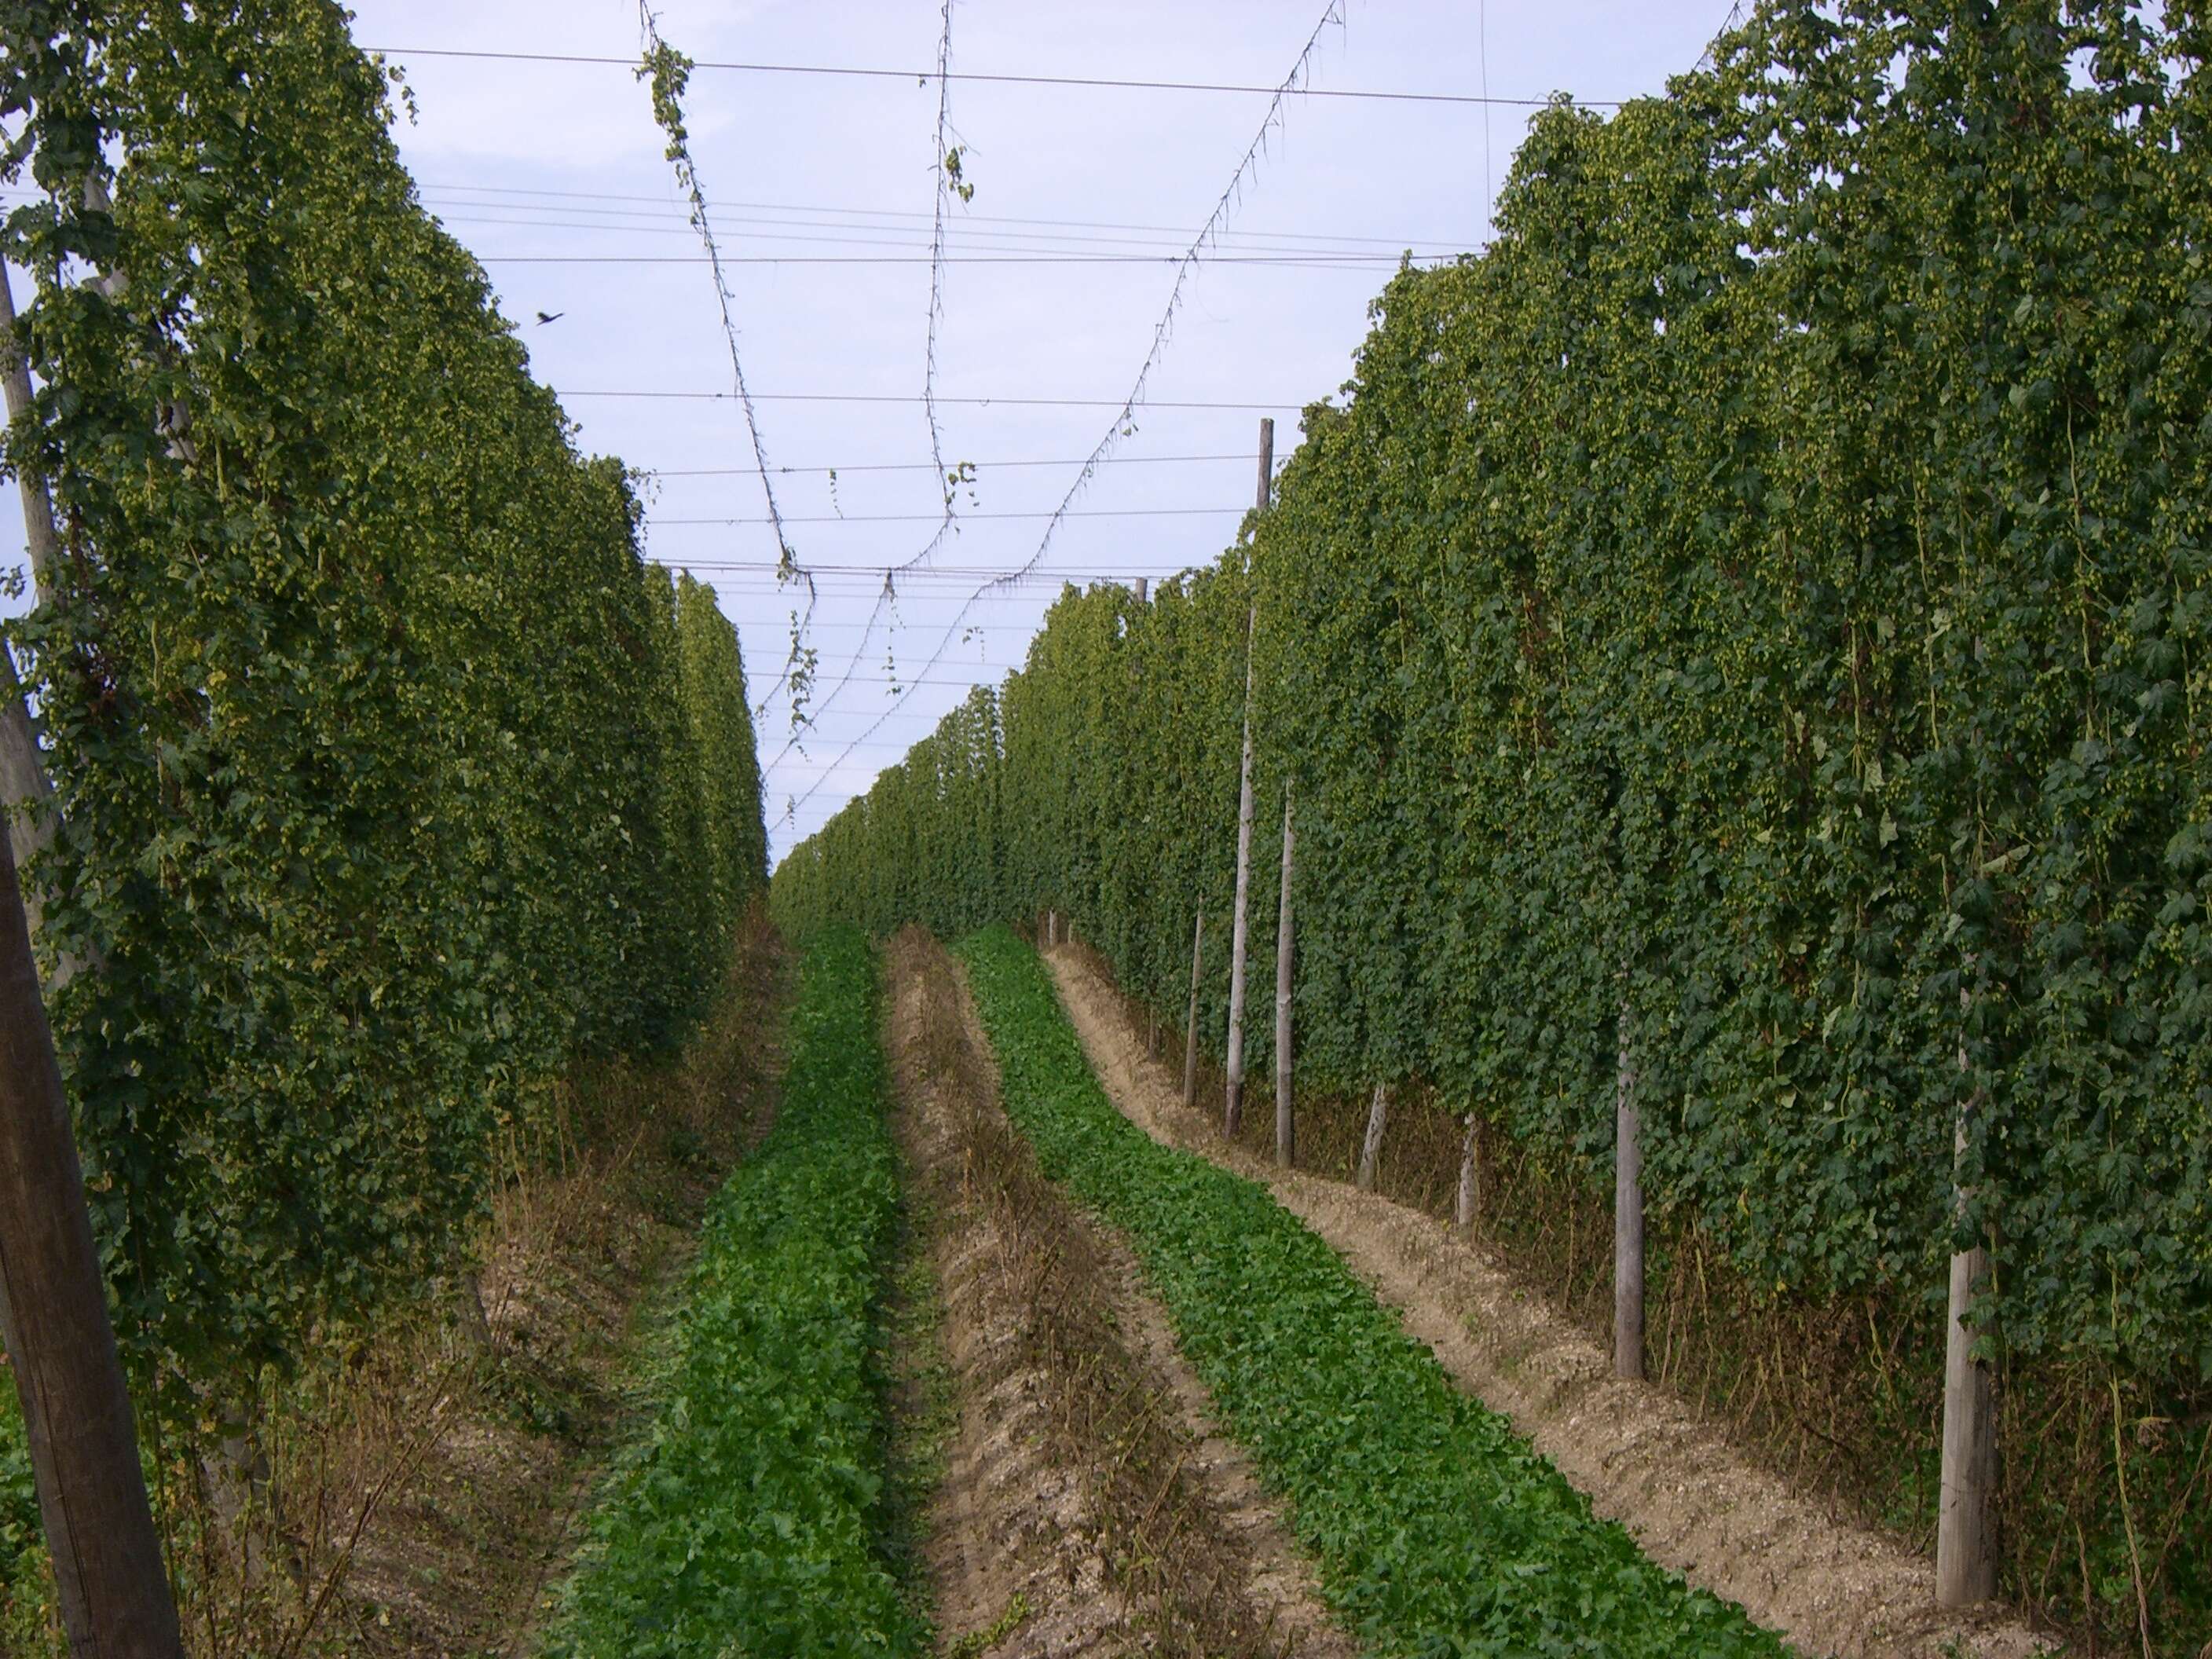 Image of common hop